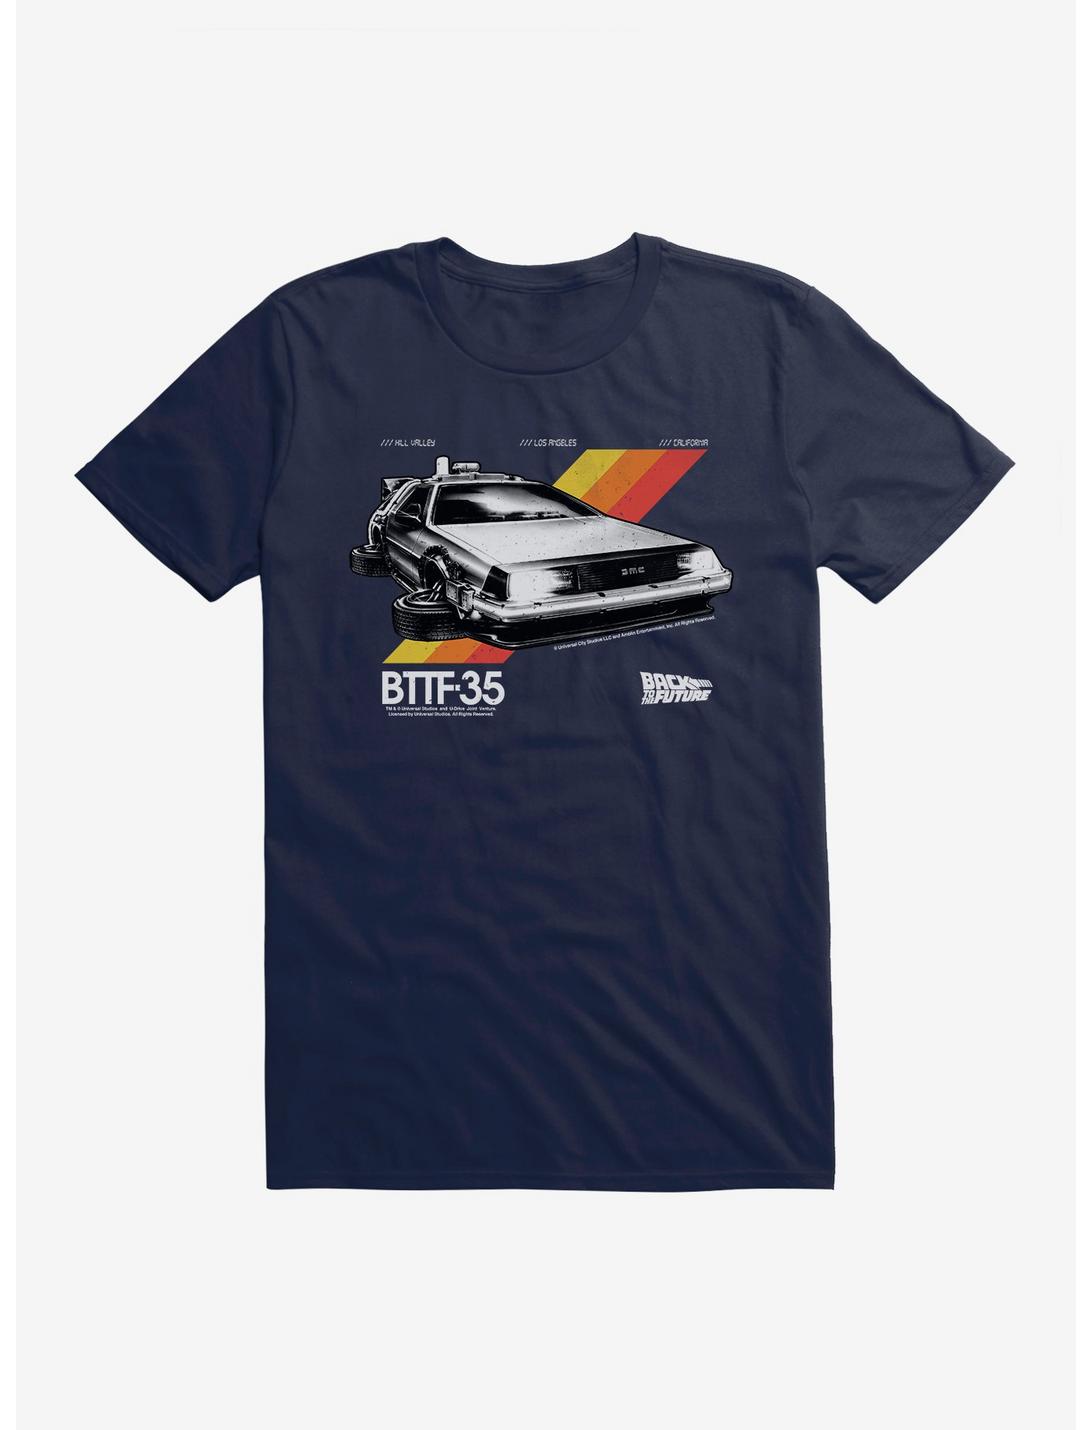 Back To The Future DeLorean Ready For Flight T-Shirt, MIDNIGHT NAVY, hi-res